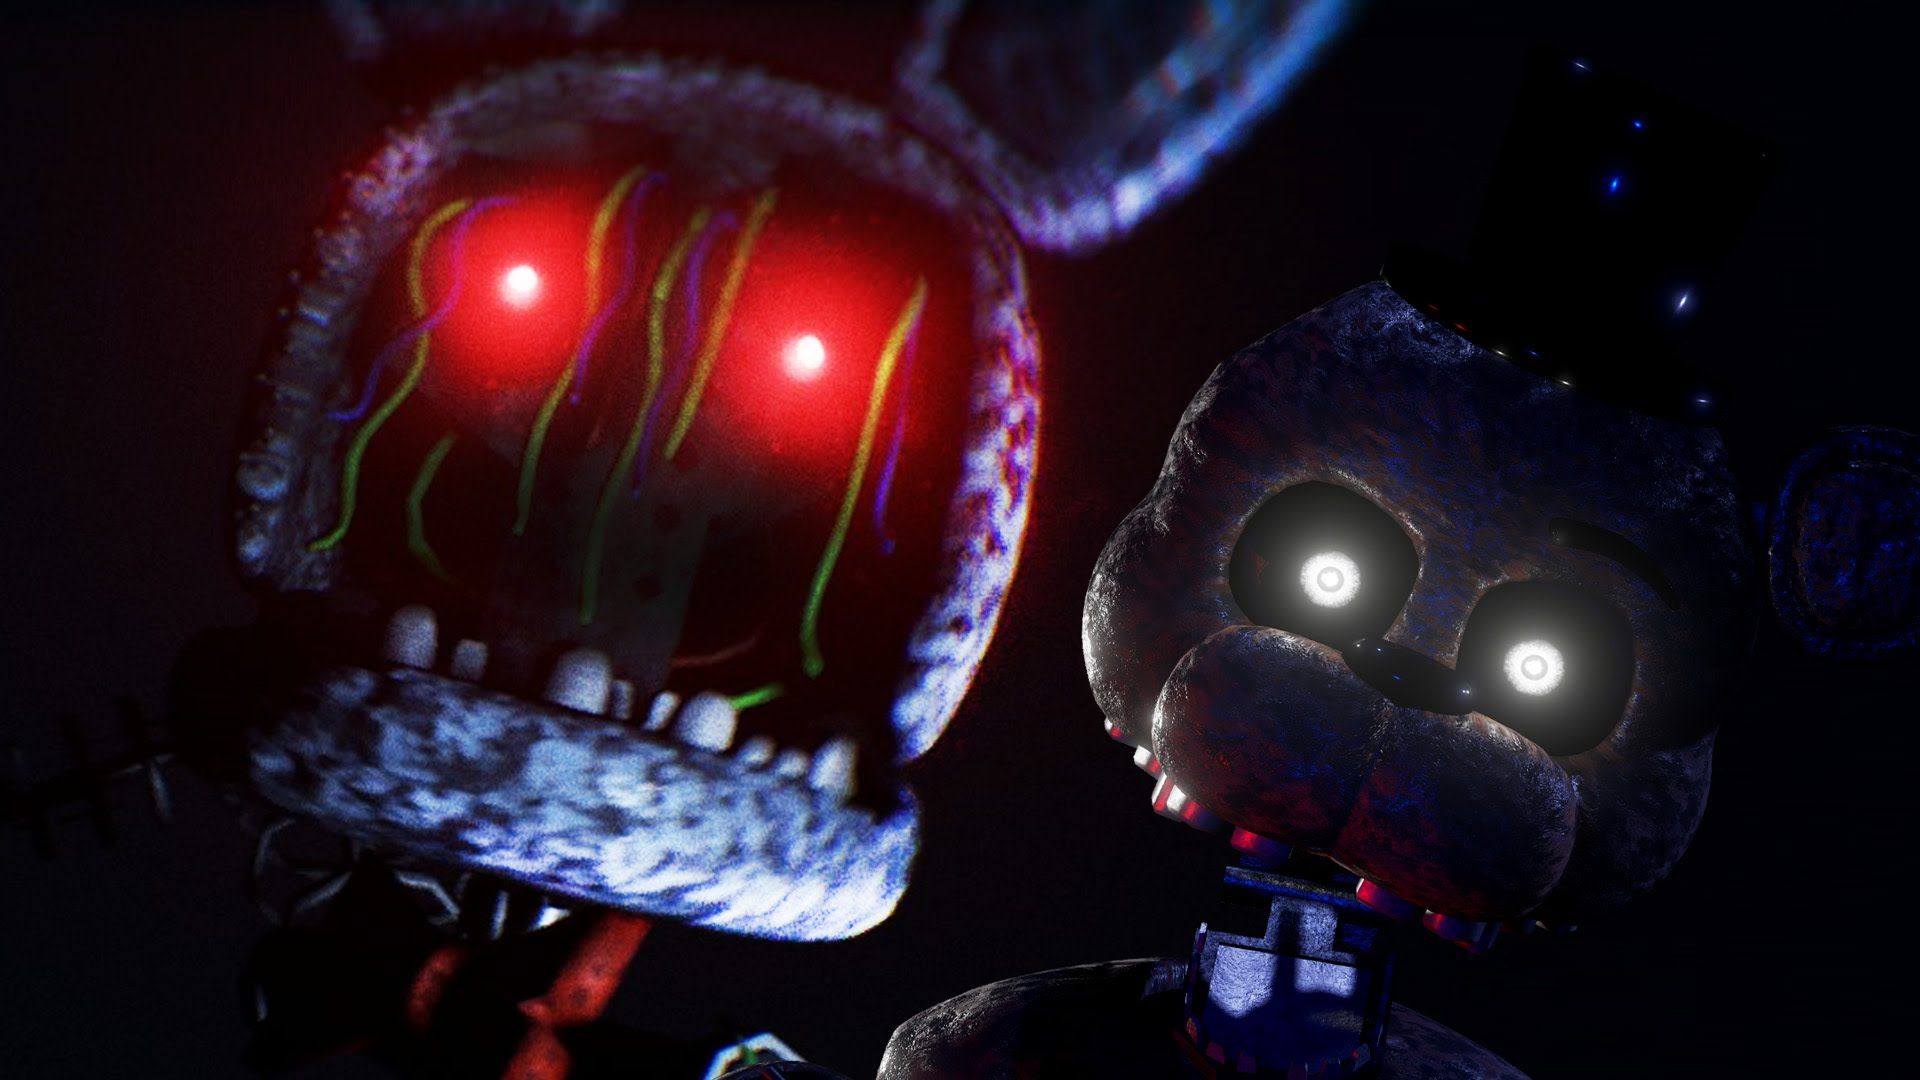 BONNIE WANTS TO PLAY. The Joy of Creation: REBORN